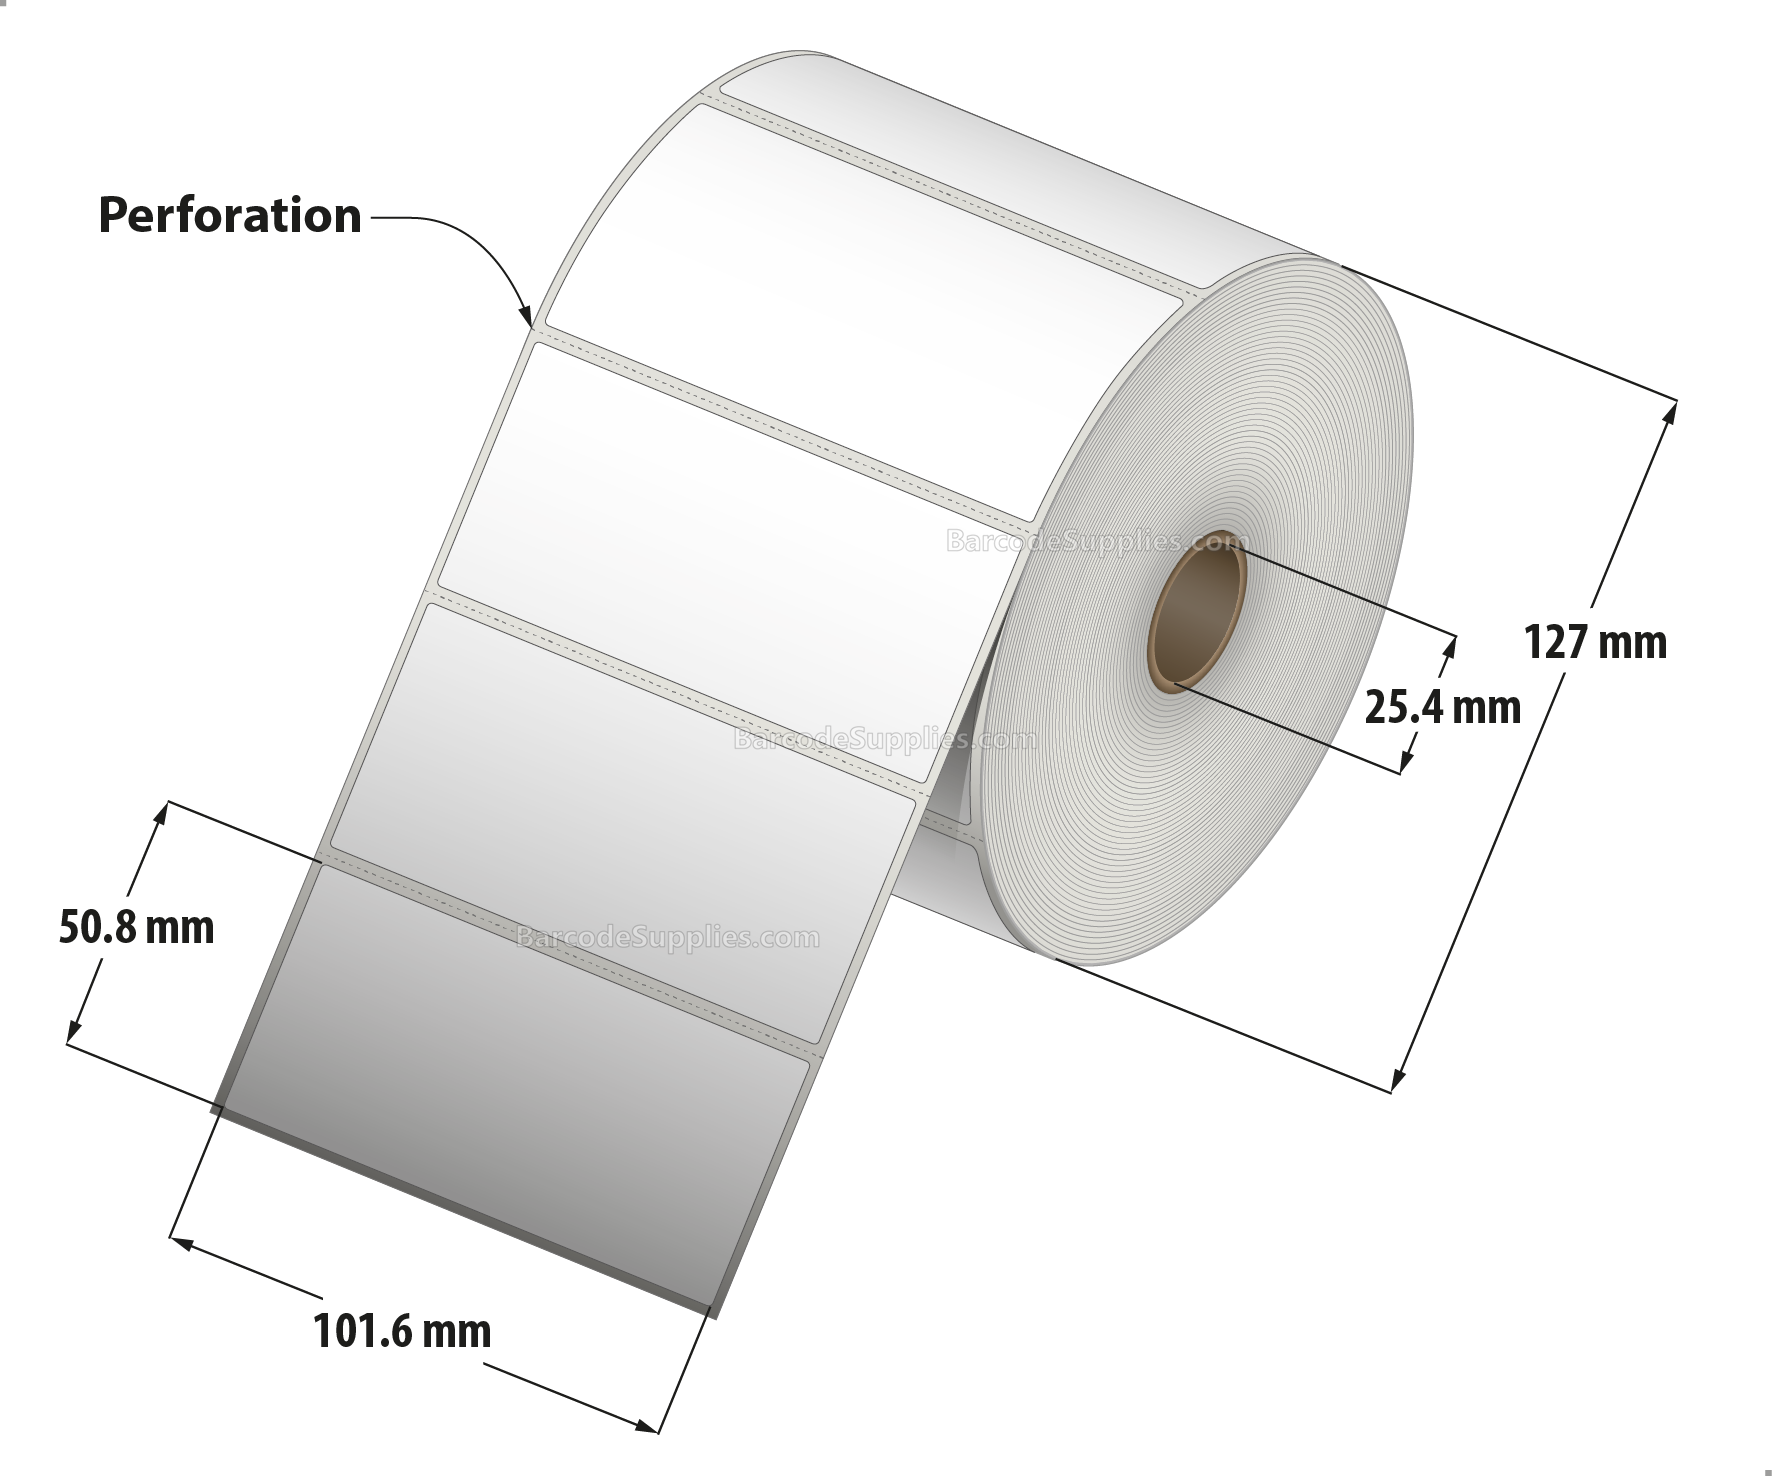 4 x 2 Thermal Transfer White Labels With Permanent Acrylic Adhesive - Perforated - 1250 Labels Per Roll - Carton Of 4 Rolls - 5000 Labels Total - MPN: TH42-15PTT